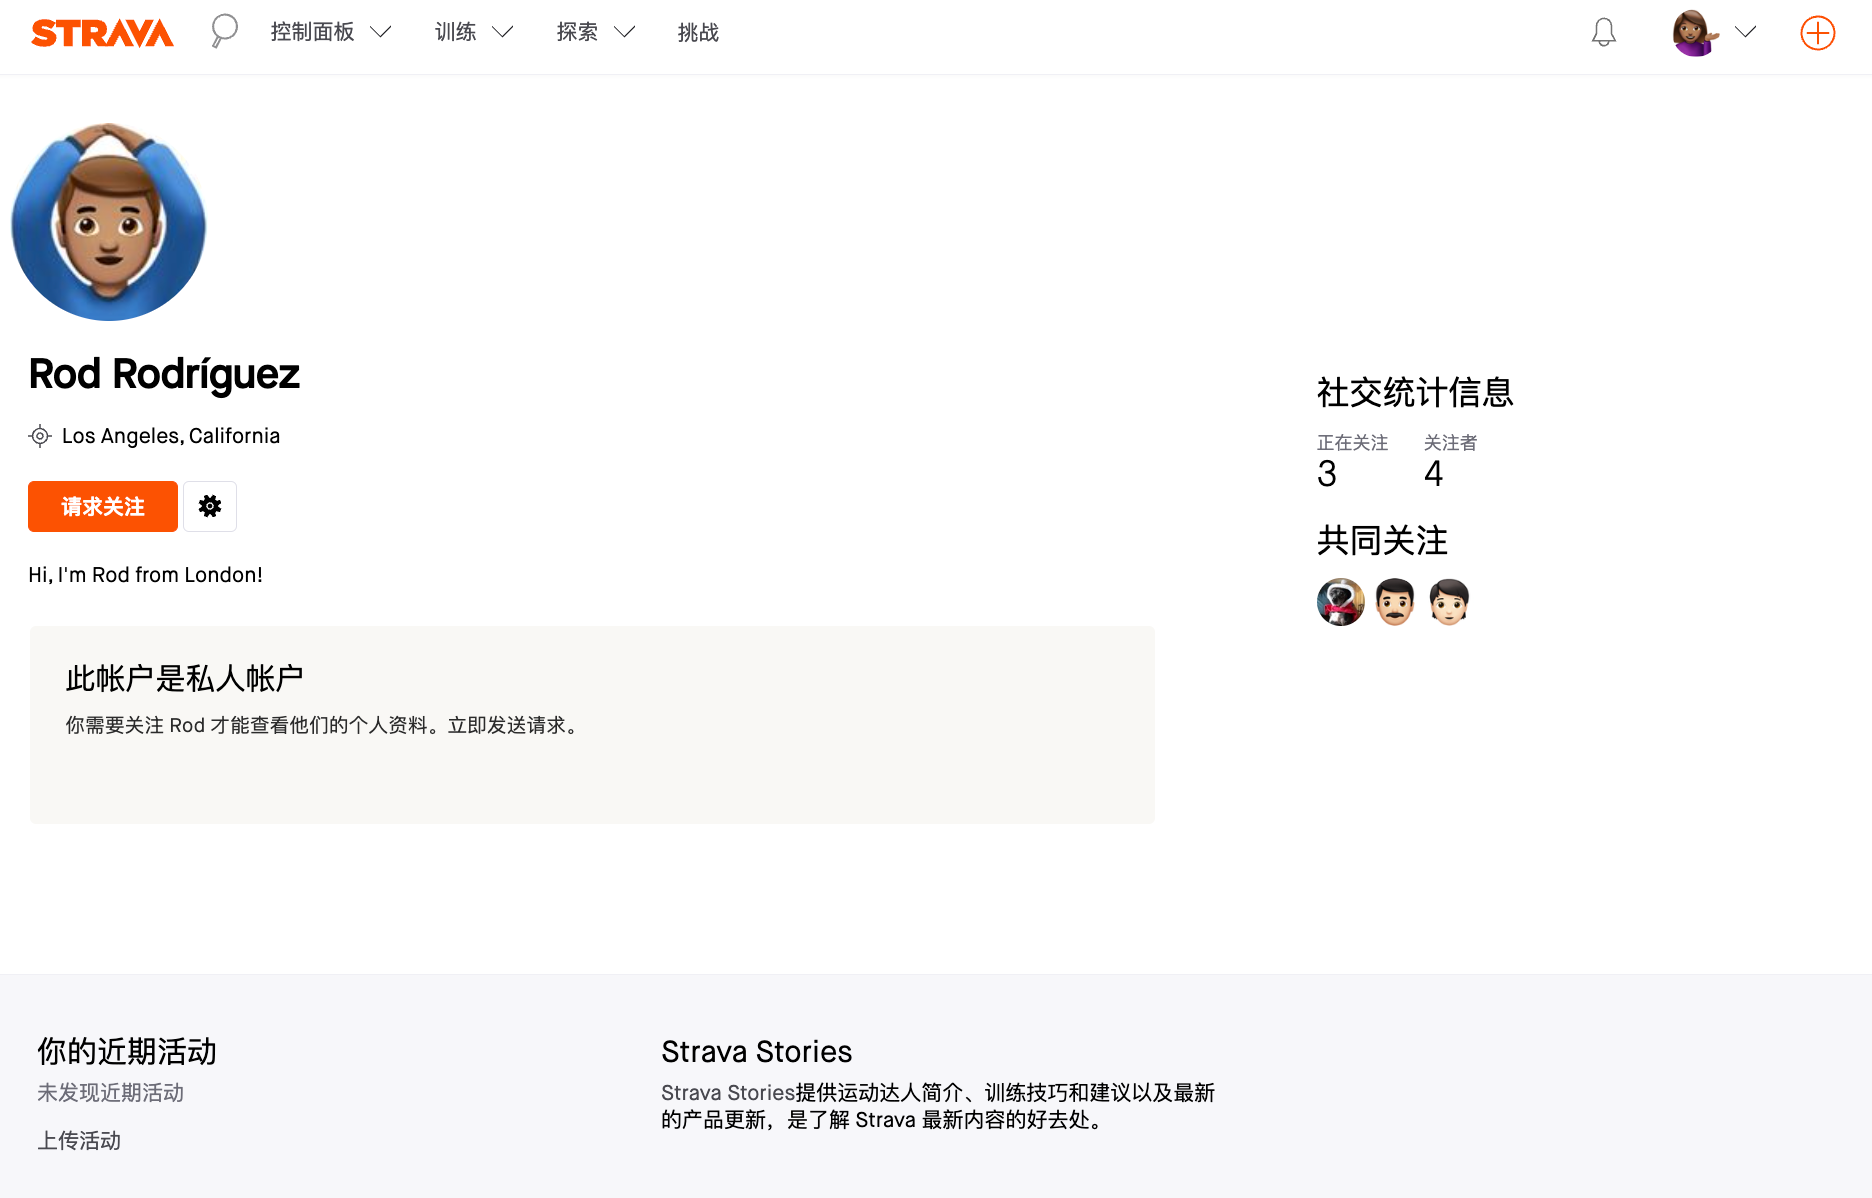 ProfilePage_SimplChinese2.png